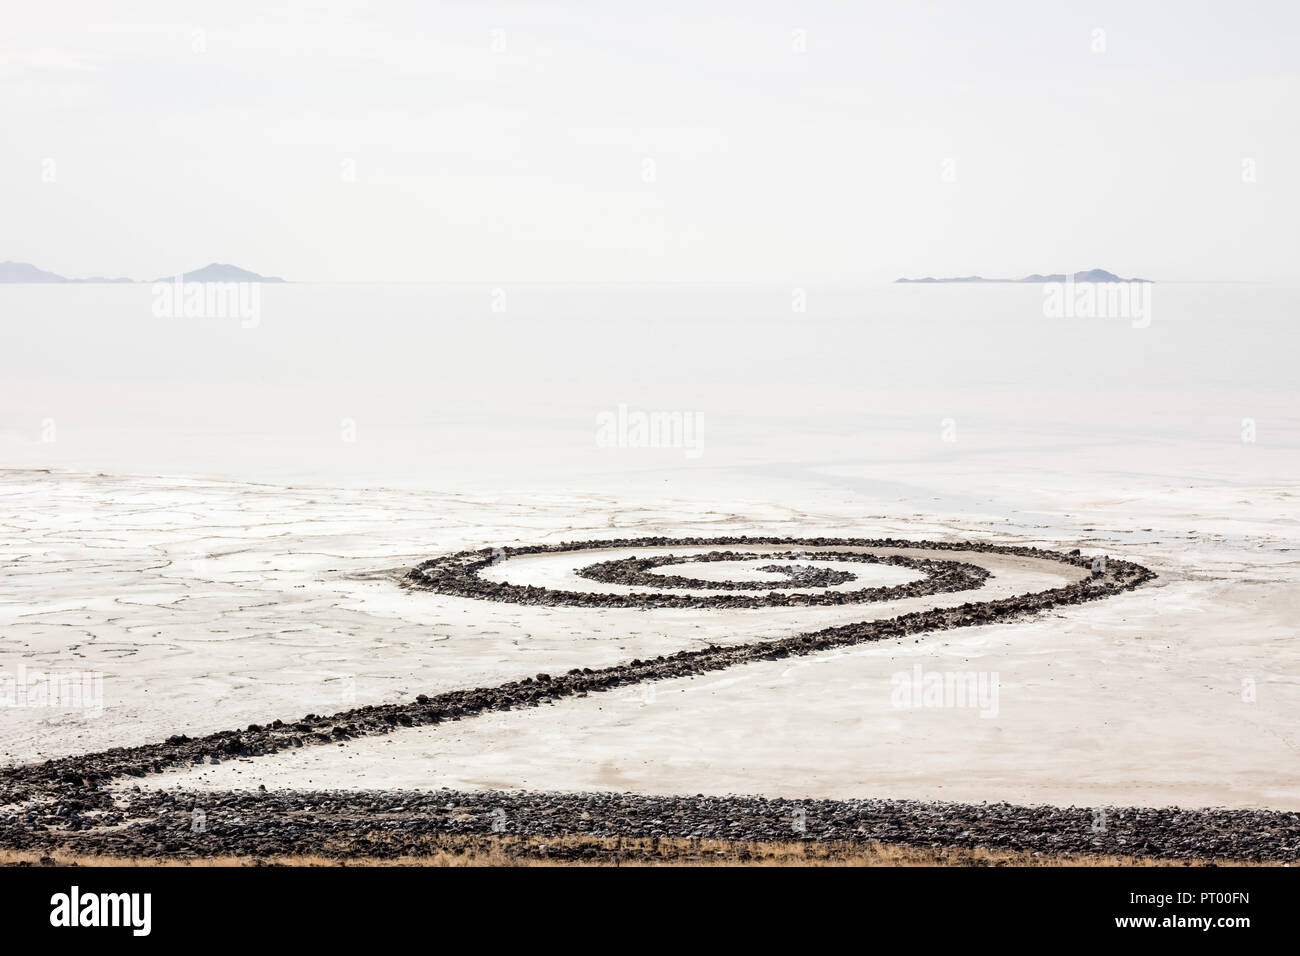 The Spiral Jetty extends into the northern end of the Great Salt Lake in Utah. Clouds overhead blend with the water of the lake in a grey layer interu Stock Photo